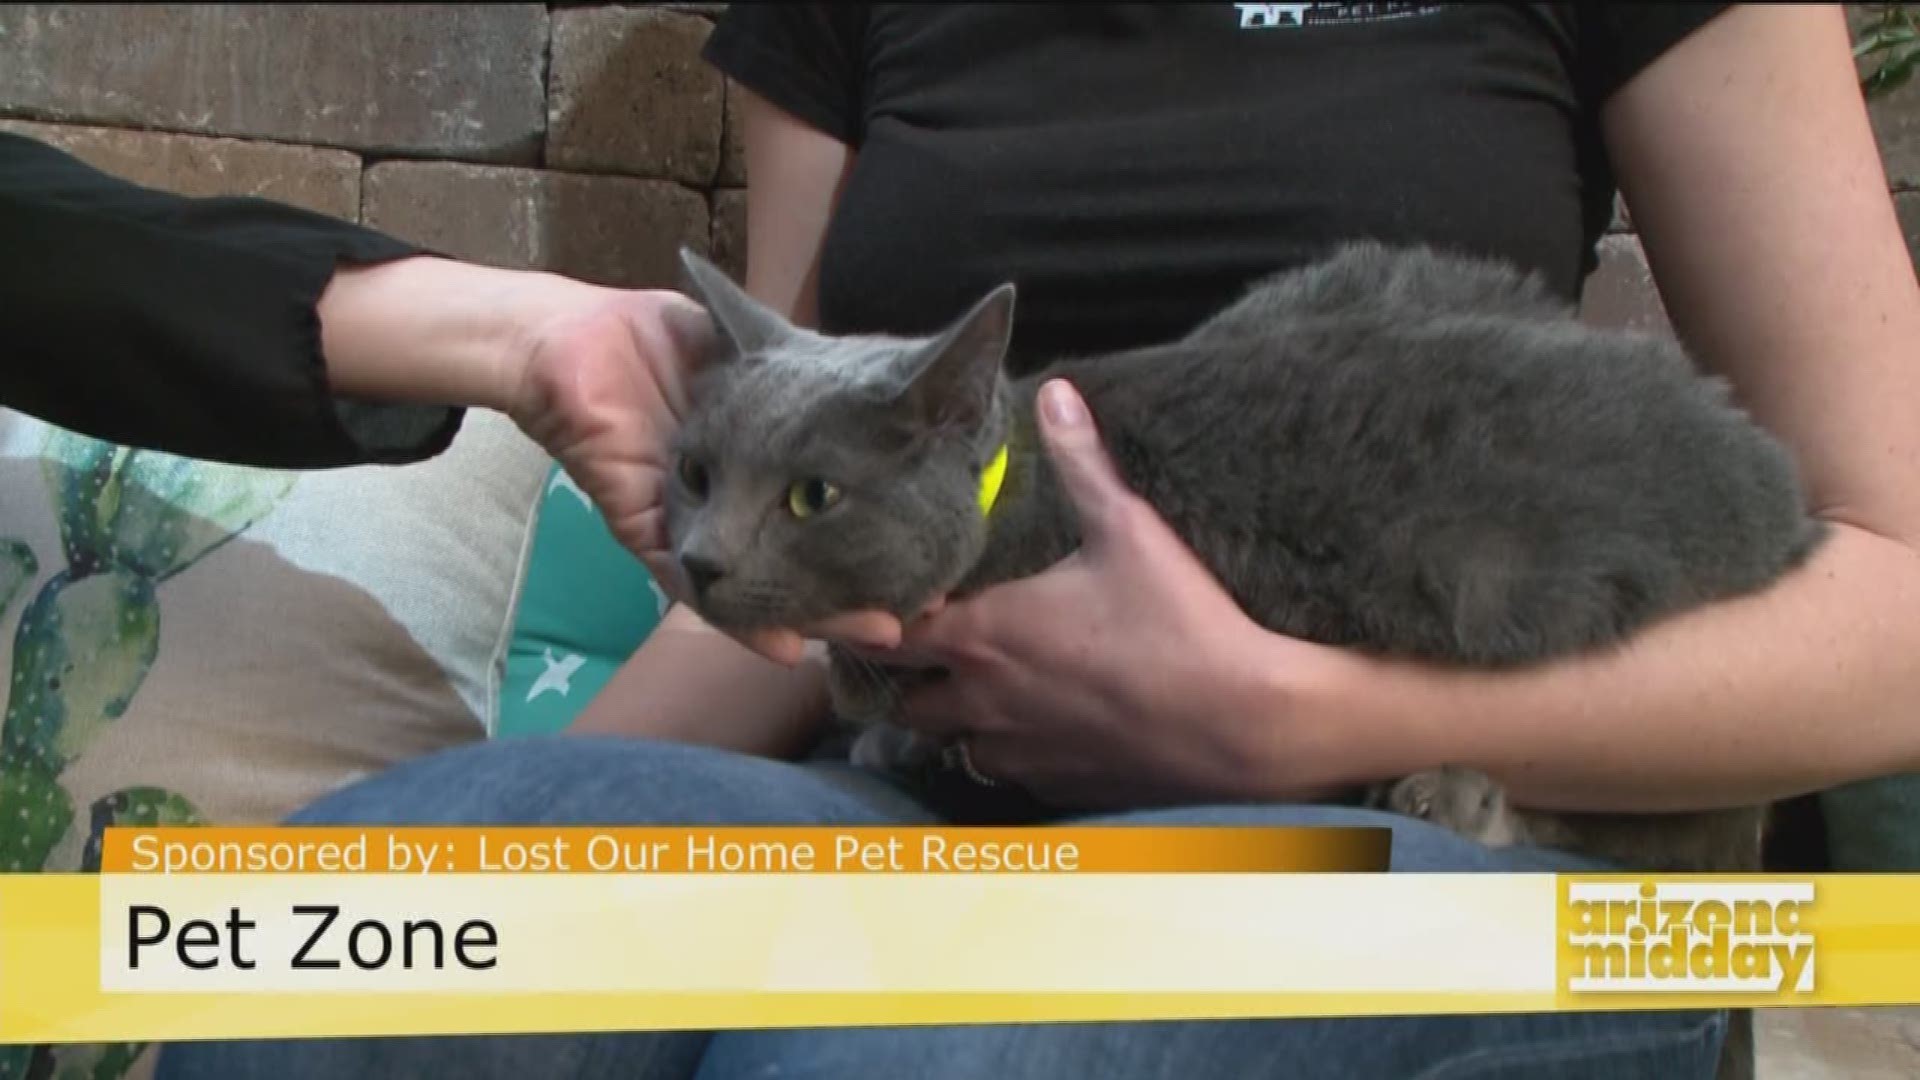 Lost Our Home's Vanessa Cornwall gives us the scoop on cat health with the help of a little furry friend up for adoption